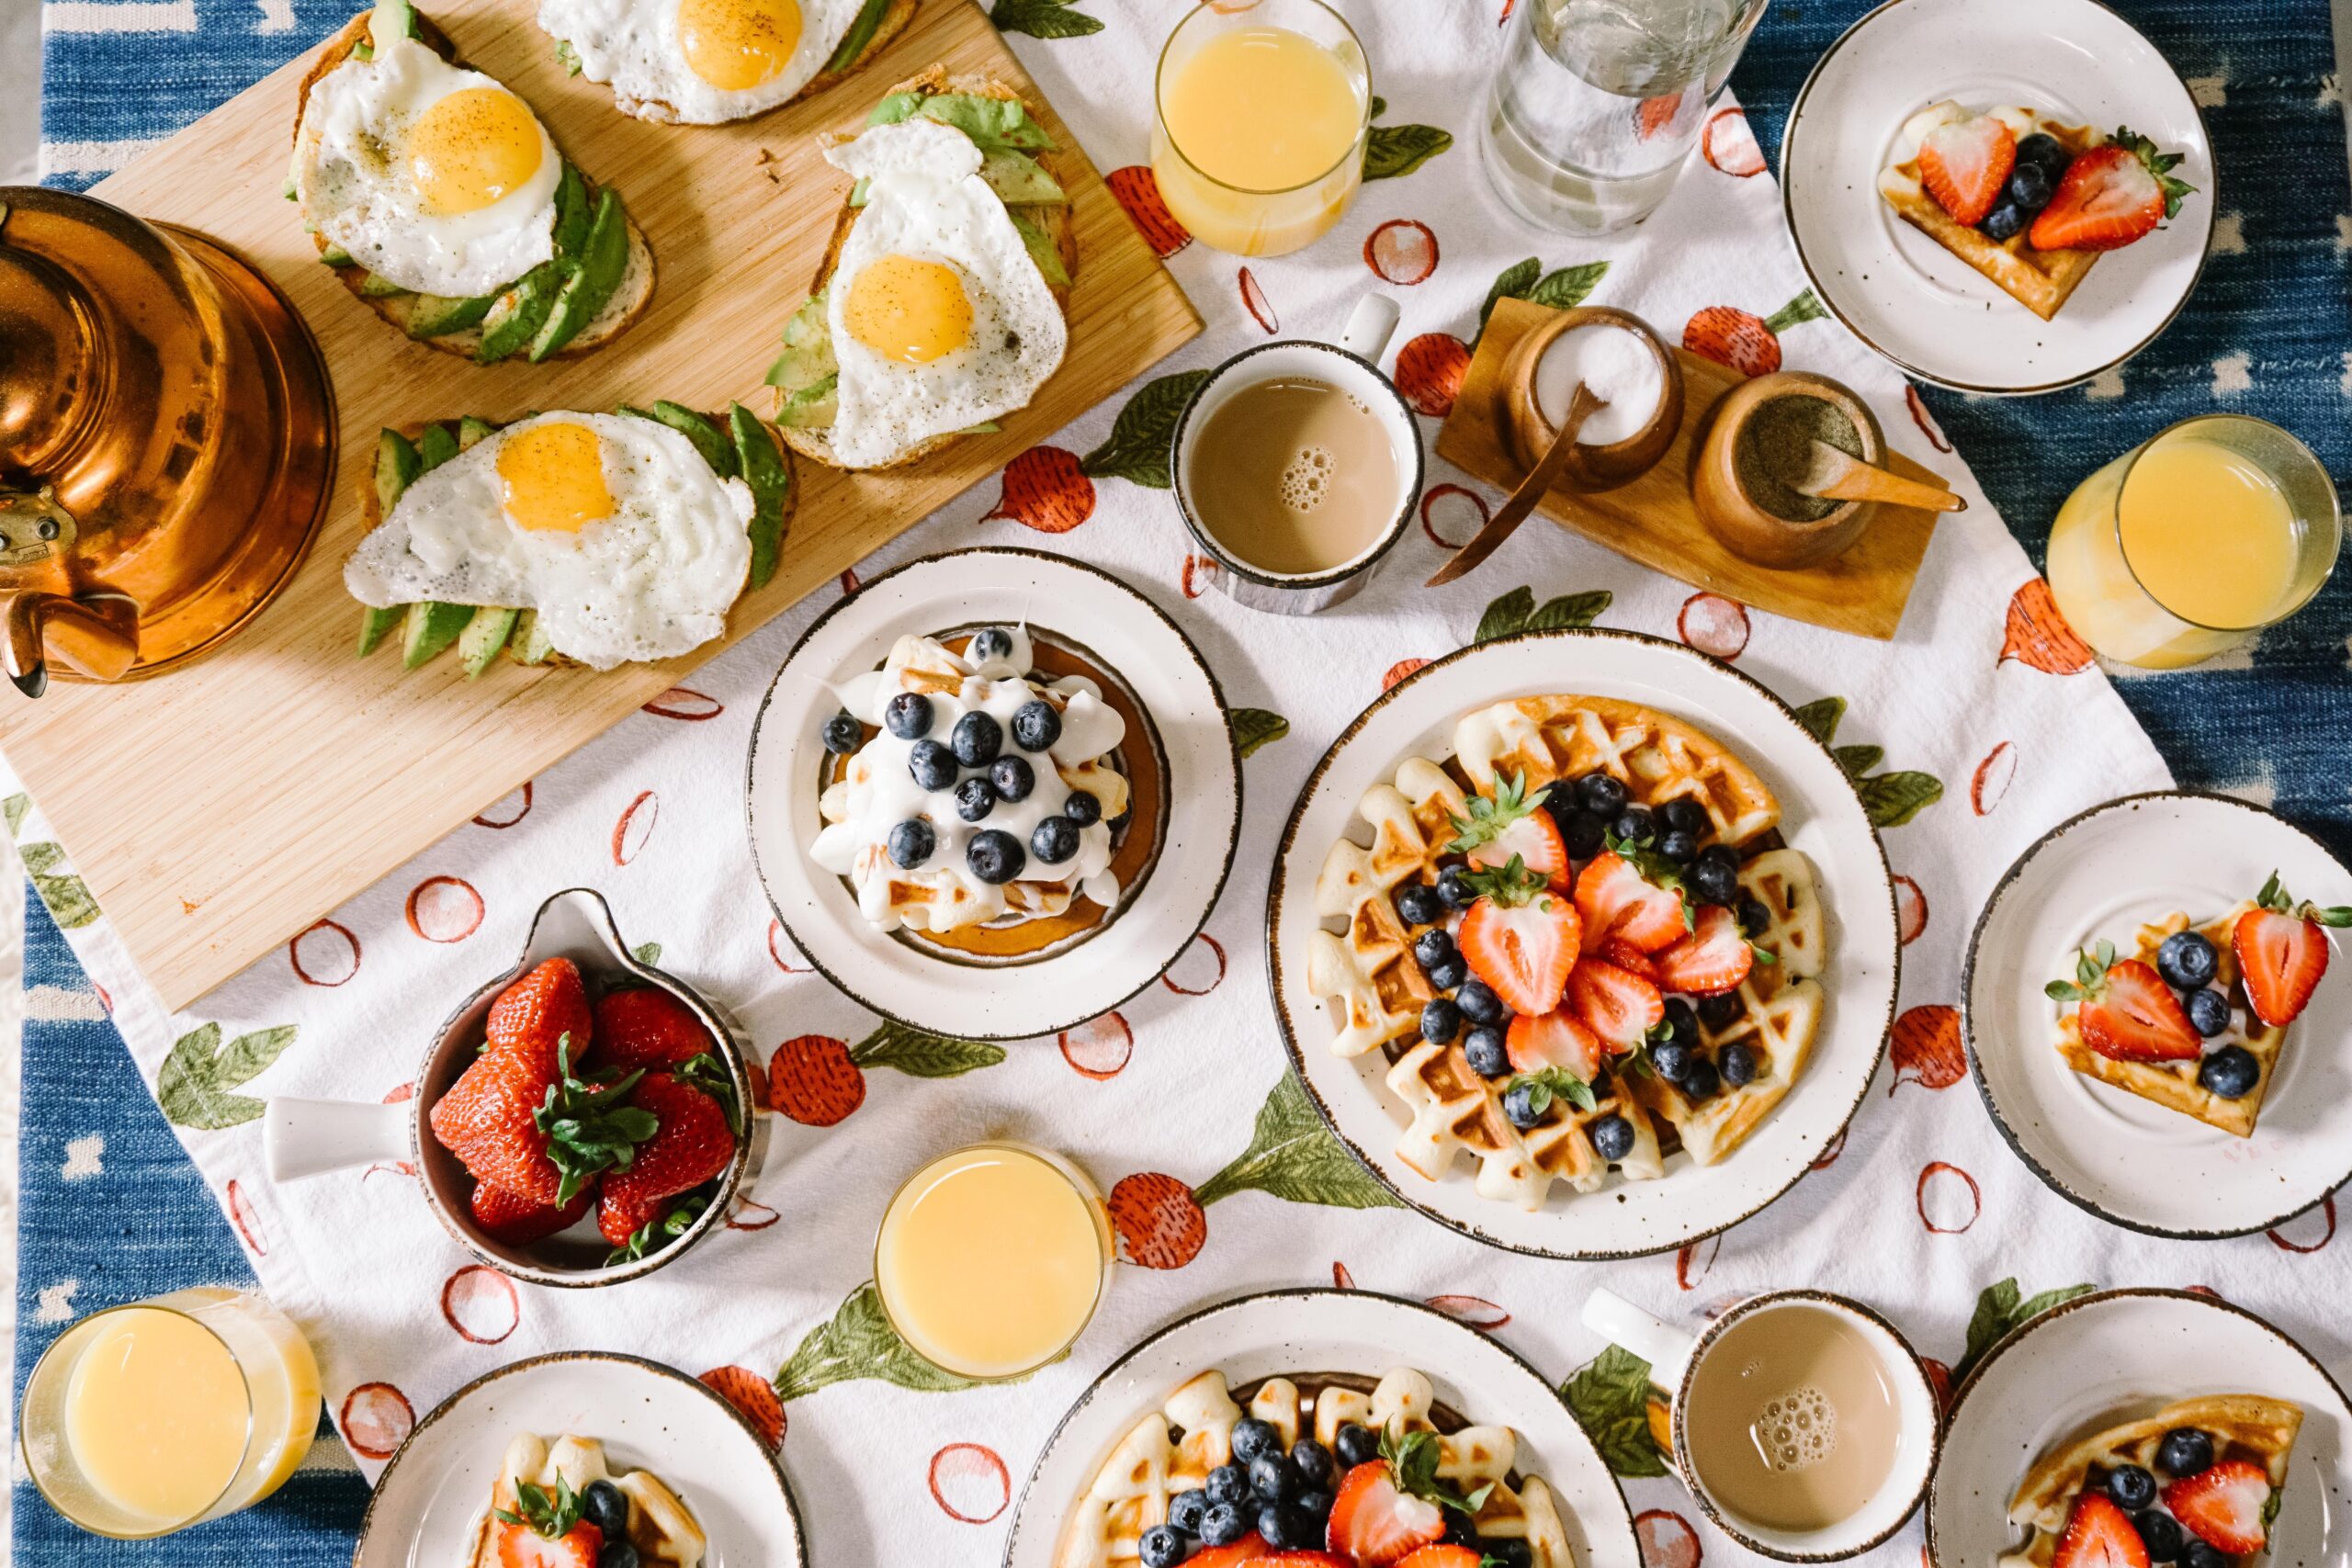 Cardiologists' Breakfast Habits And Top Food Avoidance 